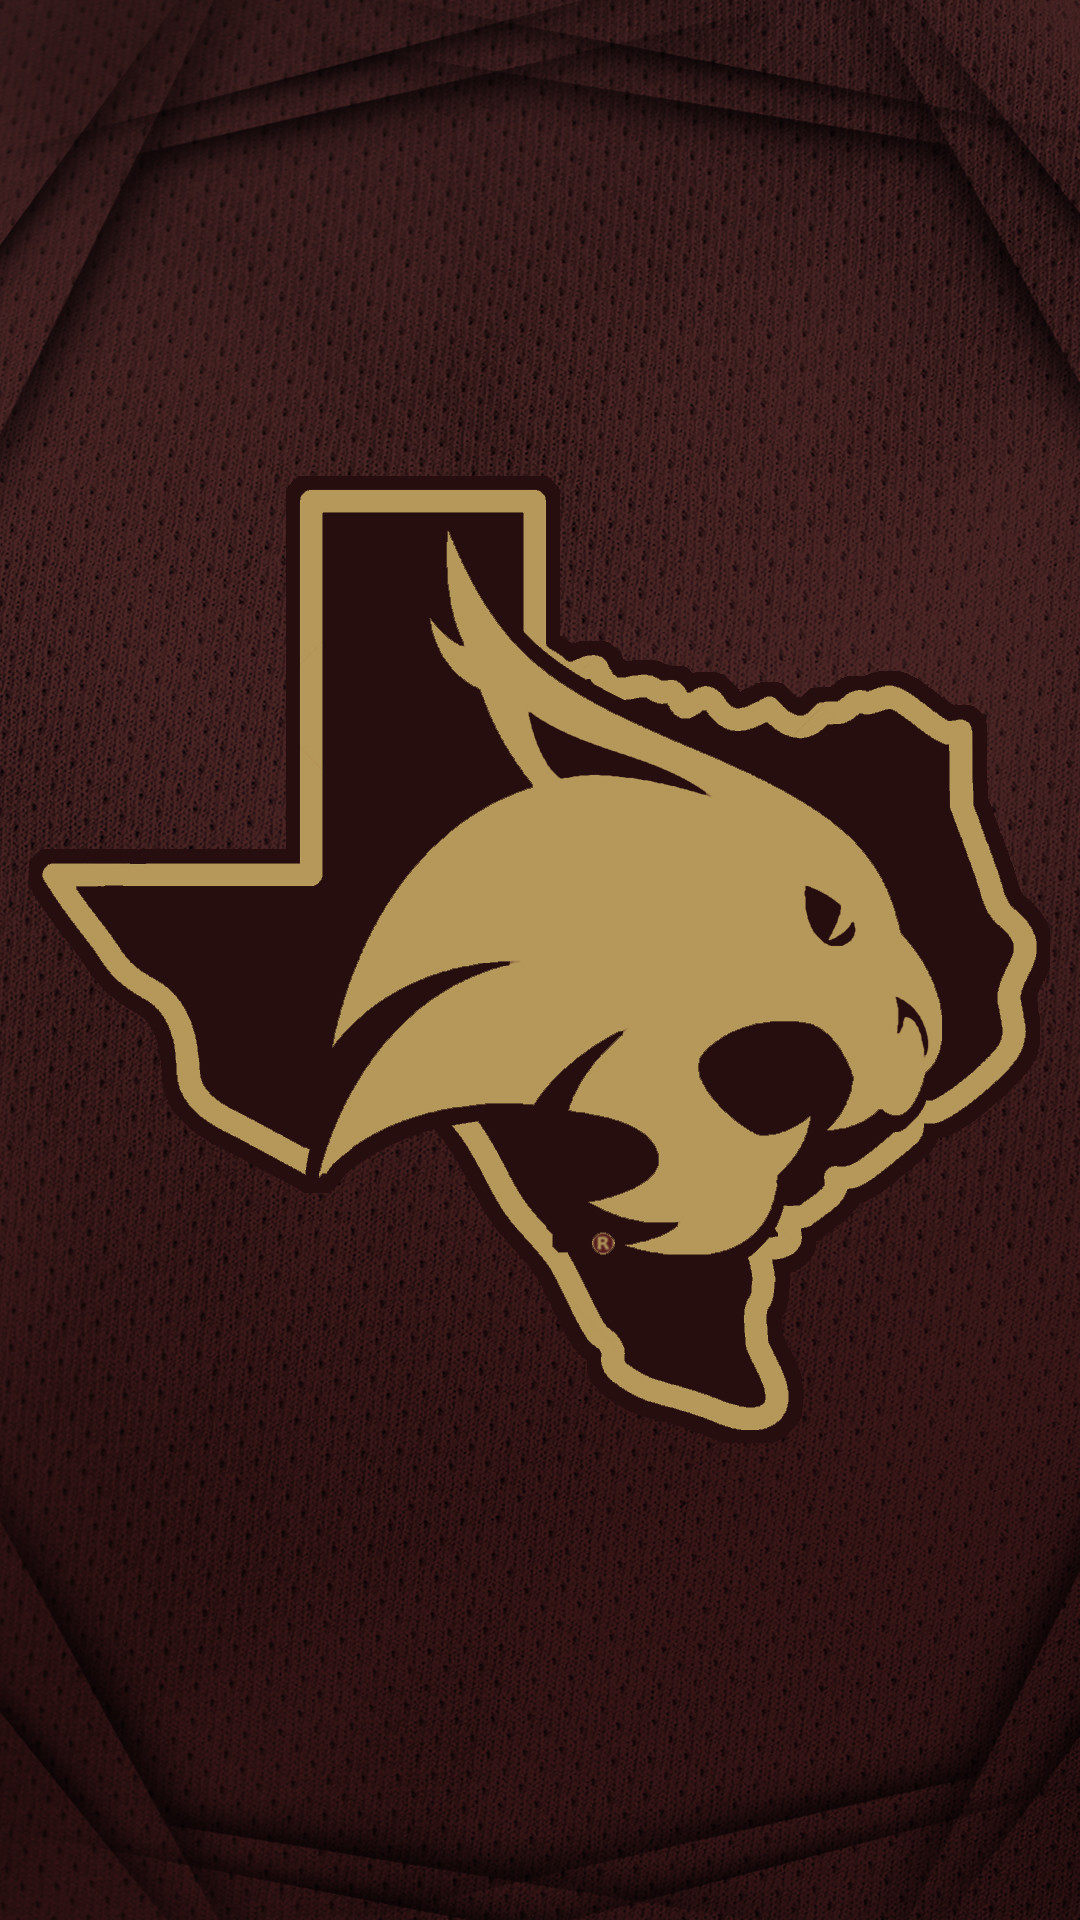 29573 
 Data Src State Of Texas Wallpaper For Phone - Texas State University Iphone - HD Wallpaper 